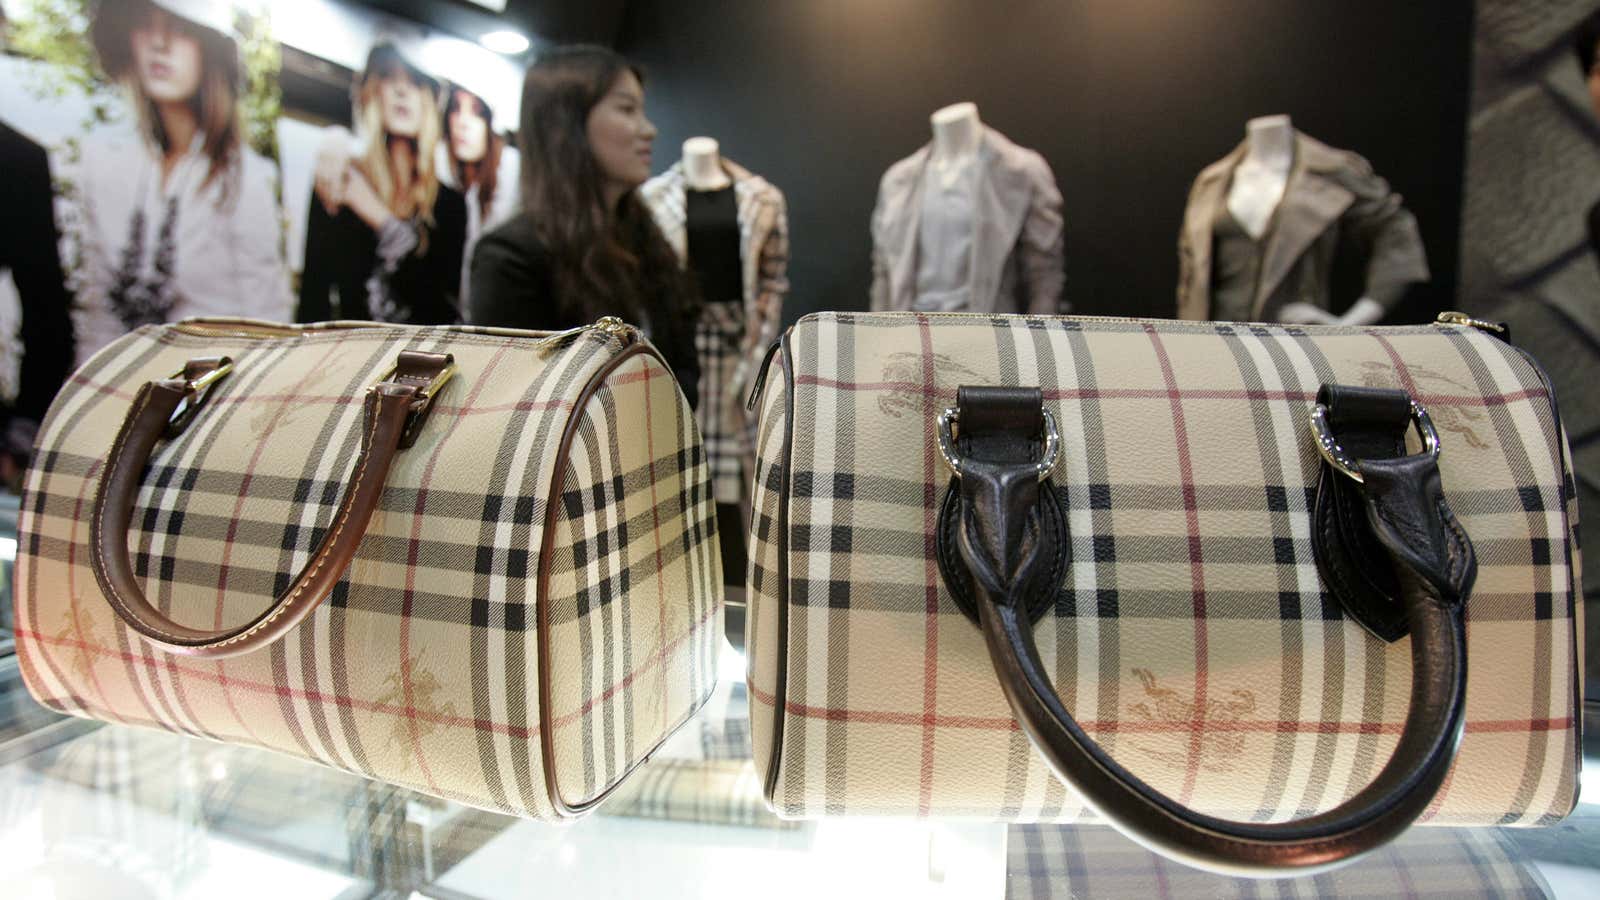 Expect to see a lot more bags like these in China (the real Burberry is on the right).